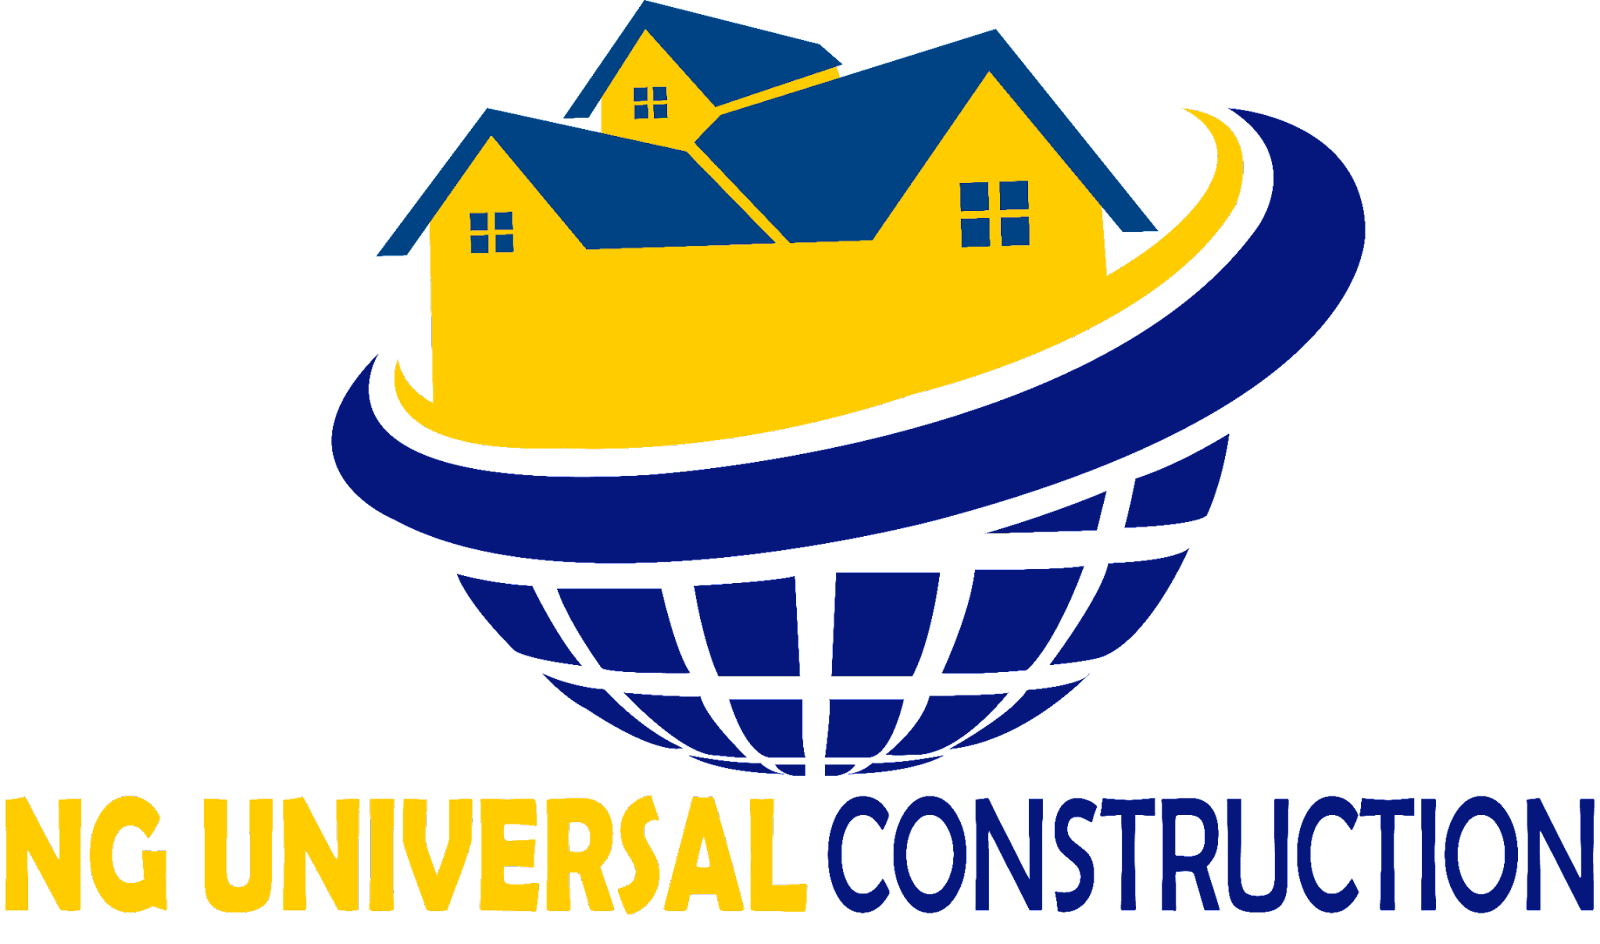 Welcome to NG Universal Construction! We are your comprehensive solution for all your construction projects in San Francisco, Marin County, San Mateo, and Sonoma, California. With a wide range of services, including painting, fences, remodeling, finish carpentry, decks, and bathrooms, we are here to turn your dreams into reality.